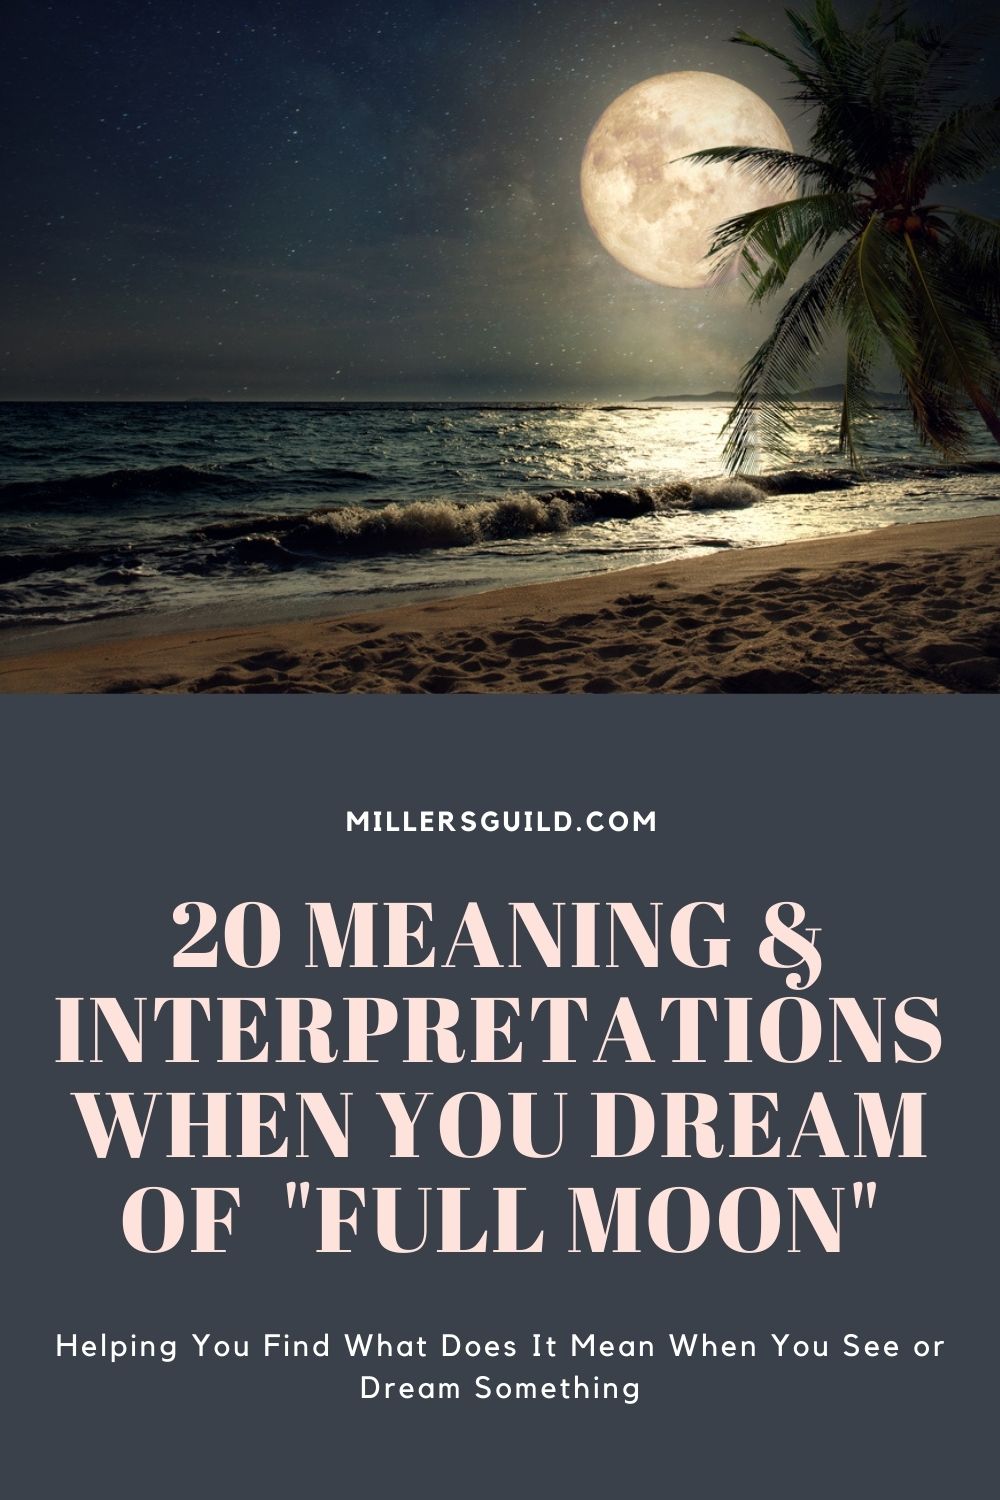 20 Meaning & Interpretations When You Dream of Full Moon 2